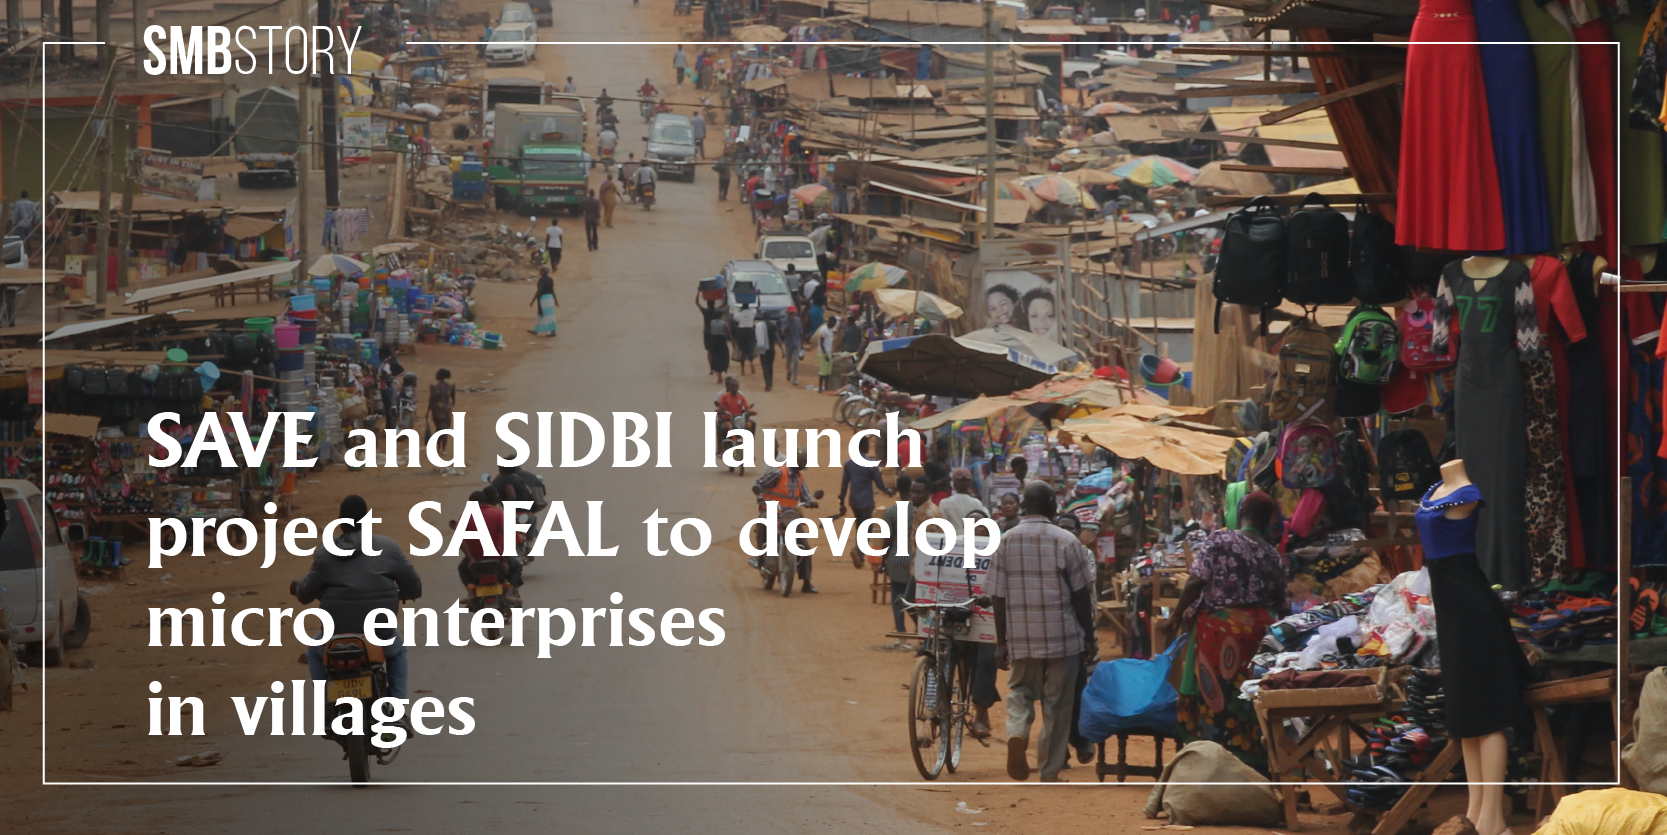 SAVE Society launches Project SAFAL in partnership with SIDBI; aims to develop micro enterprises in villages